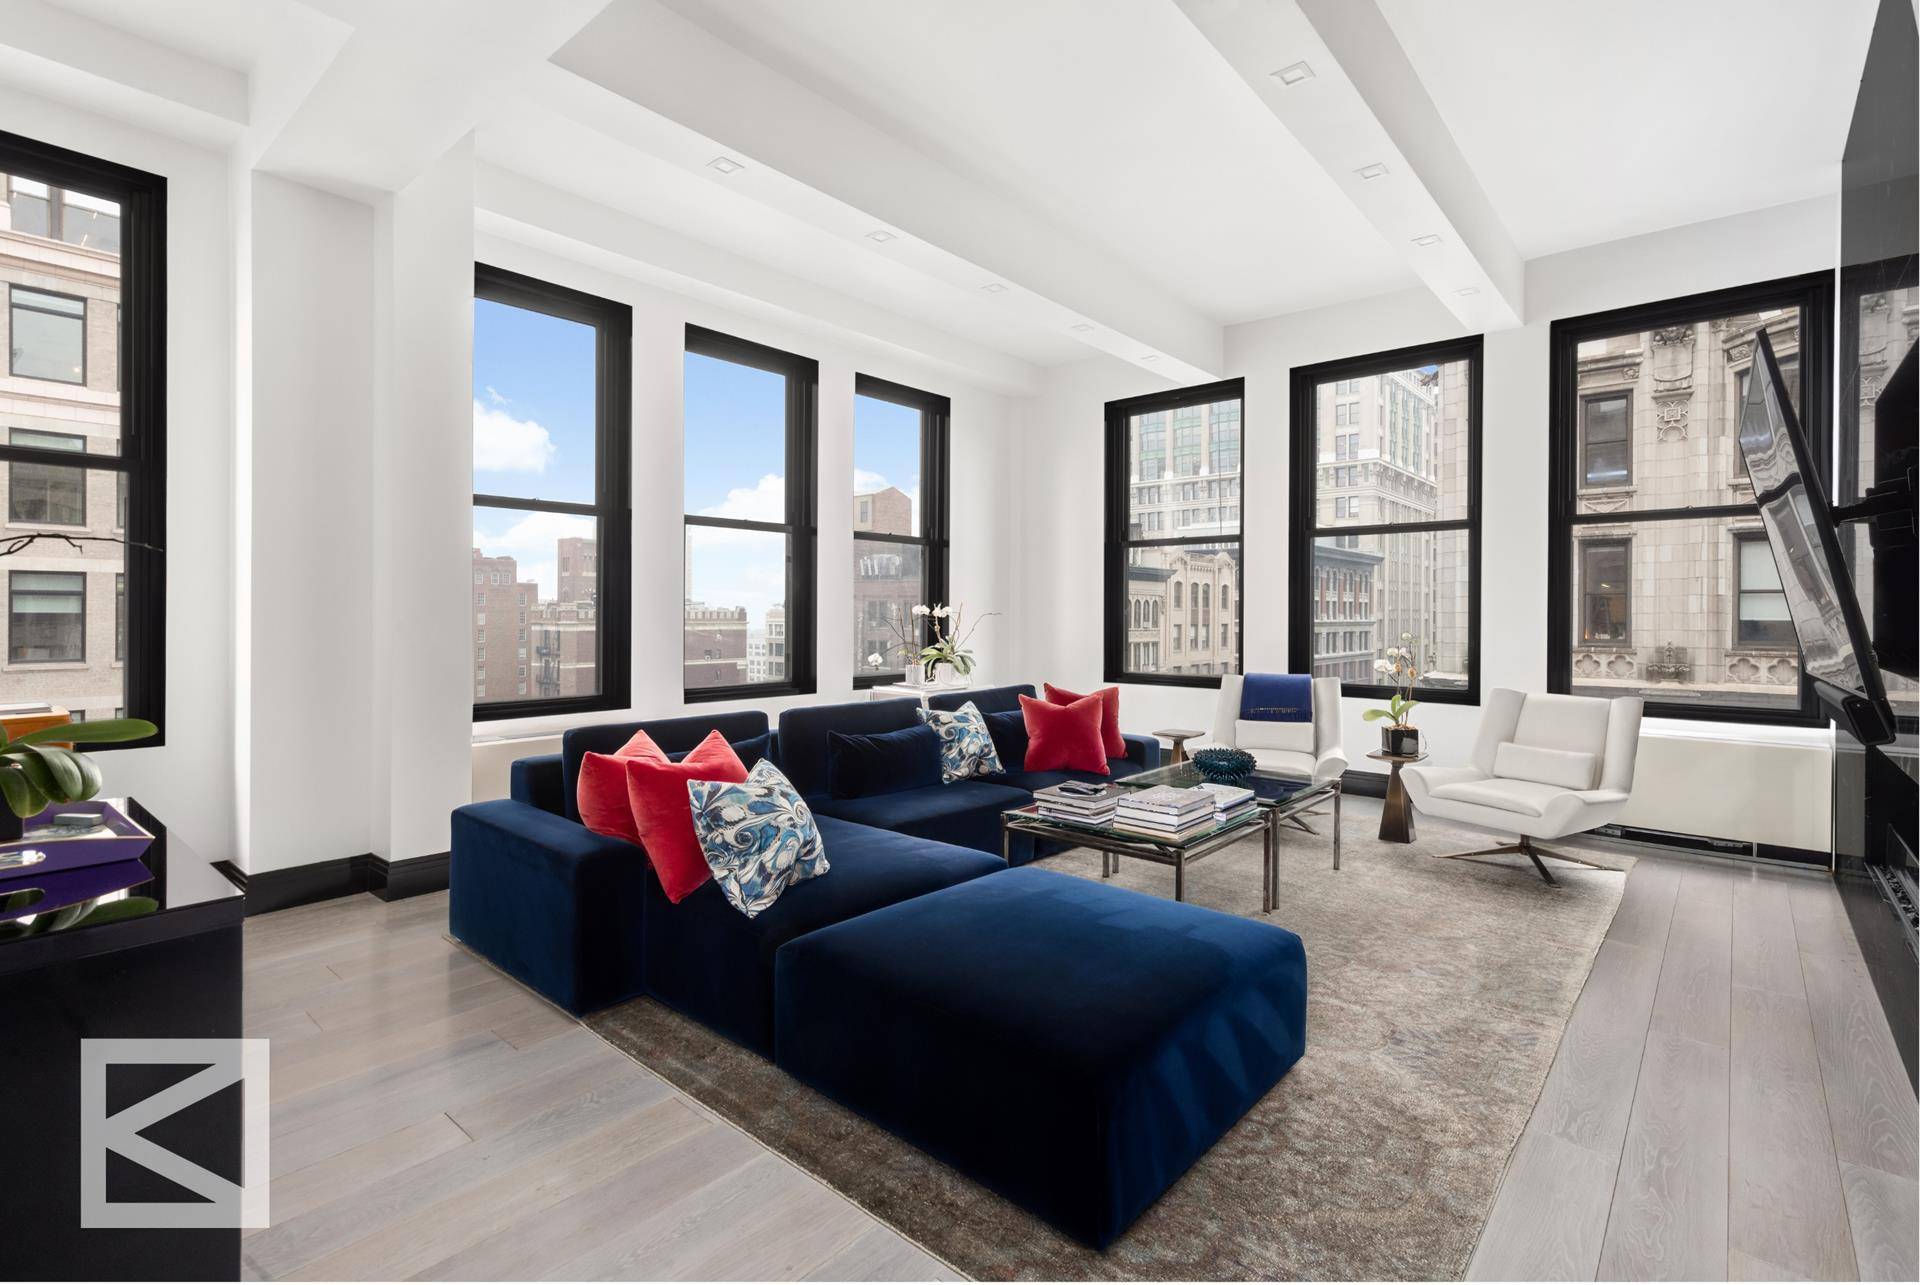 Rarely seen in this location, this beautifully arranged residence, with soaring 12 foot tall ceilings, commands a prominent position above Gramercy Flat Iron.